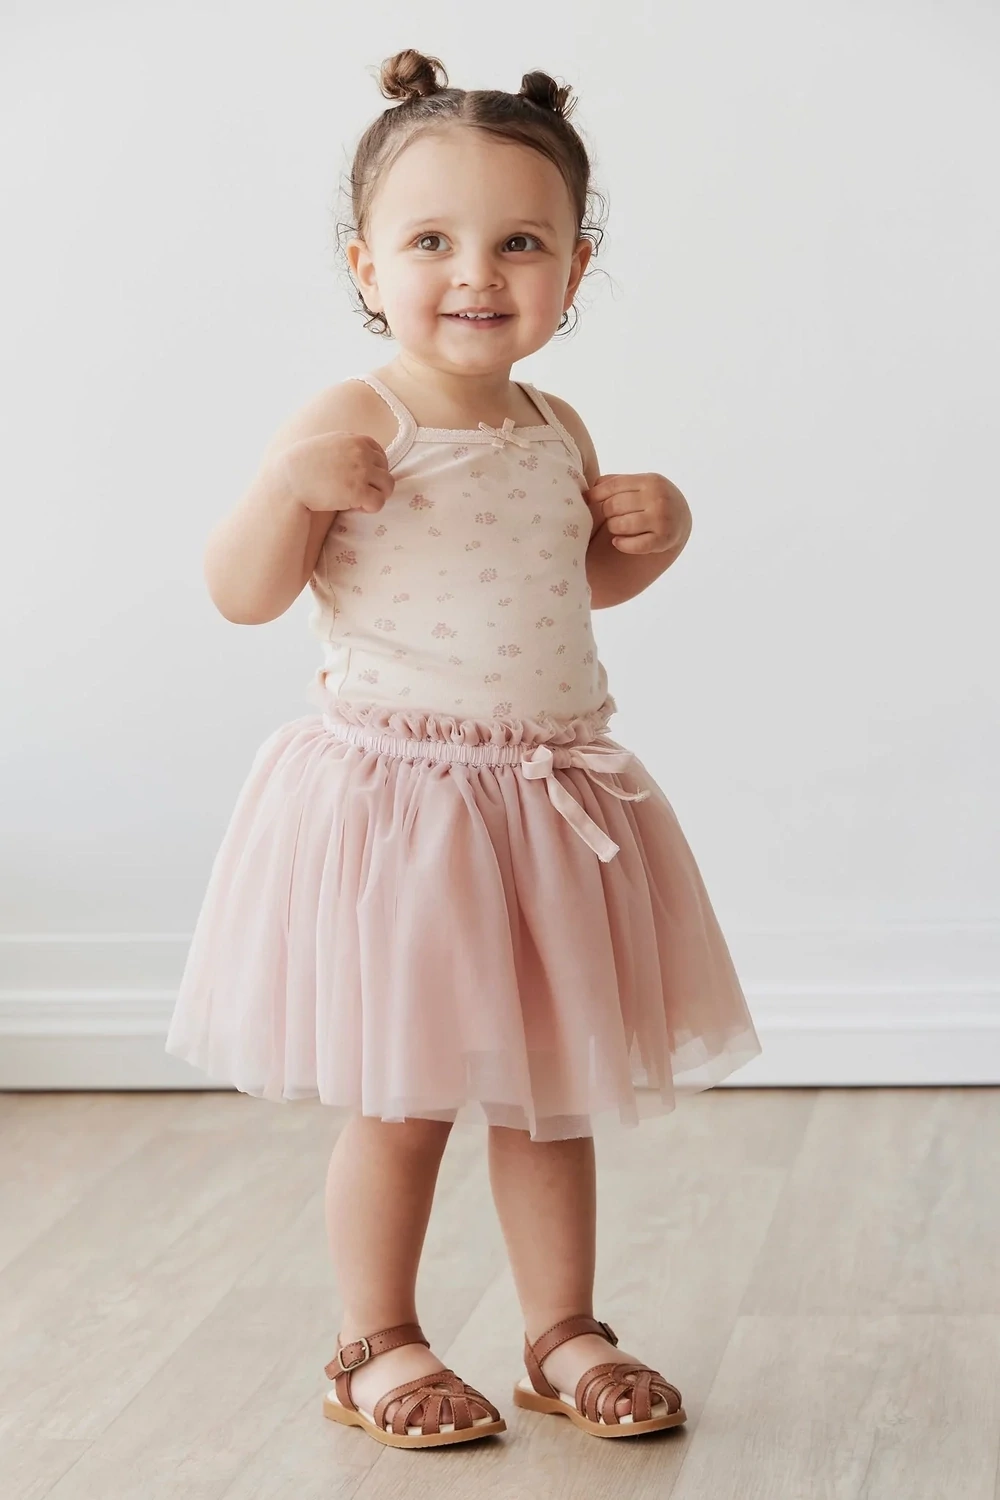 Classic Tutu Skirt - Shell Pink, Color: Shell Pink, Size: 2Y